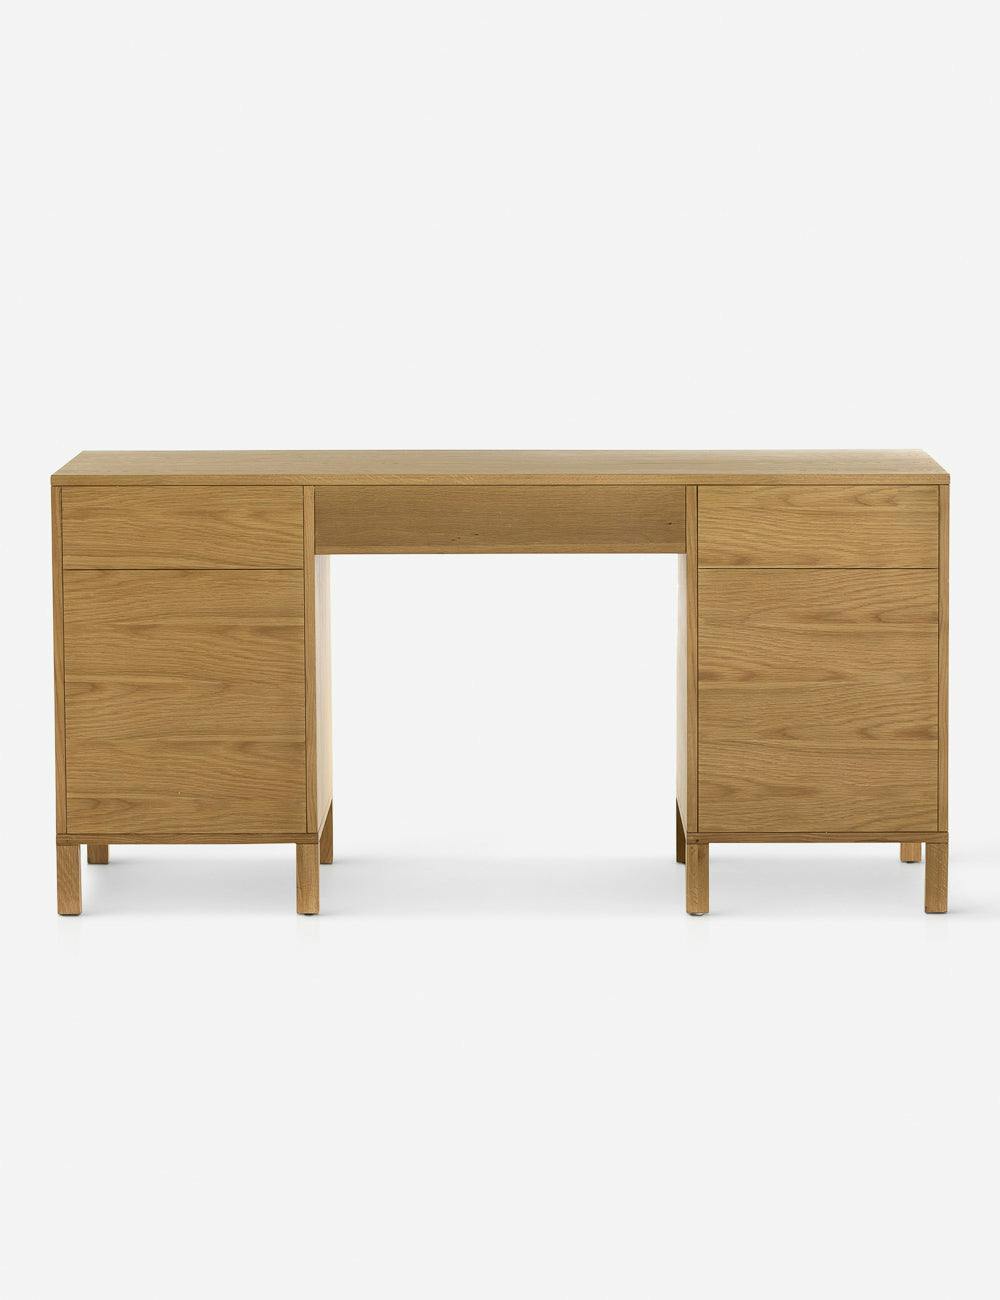 Allegra Honey Oak Executive Desk with Cane Paneling and Cord Management